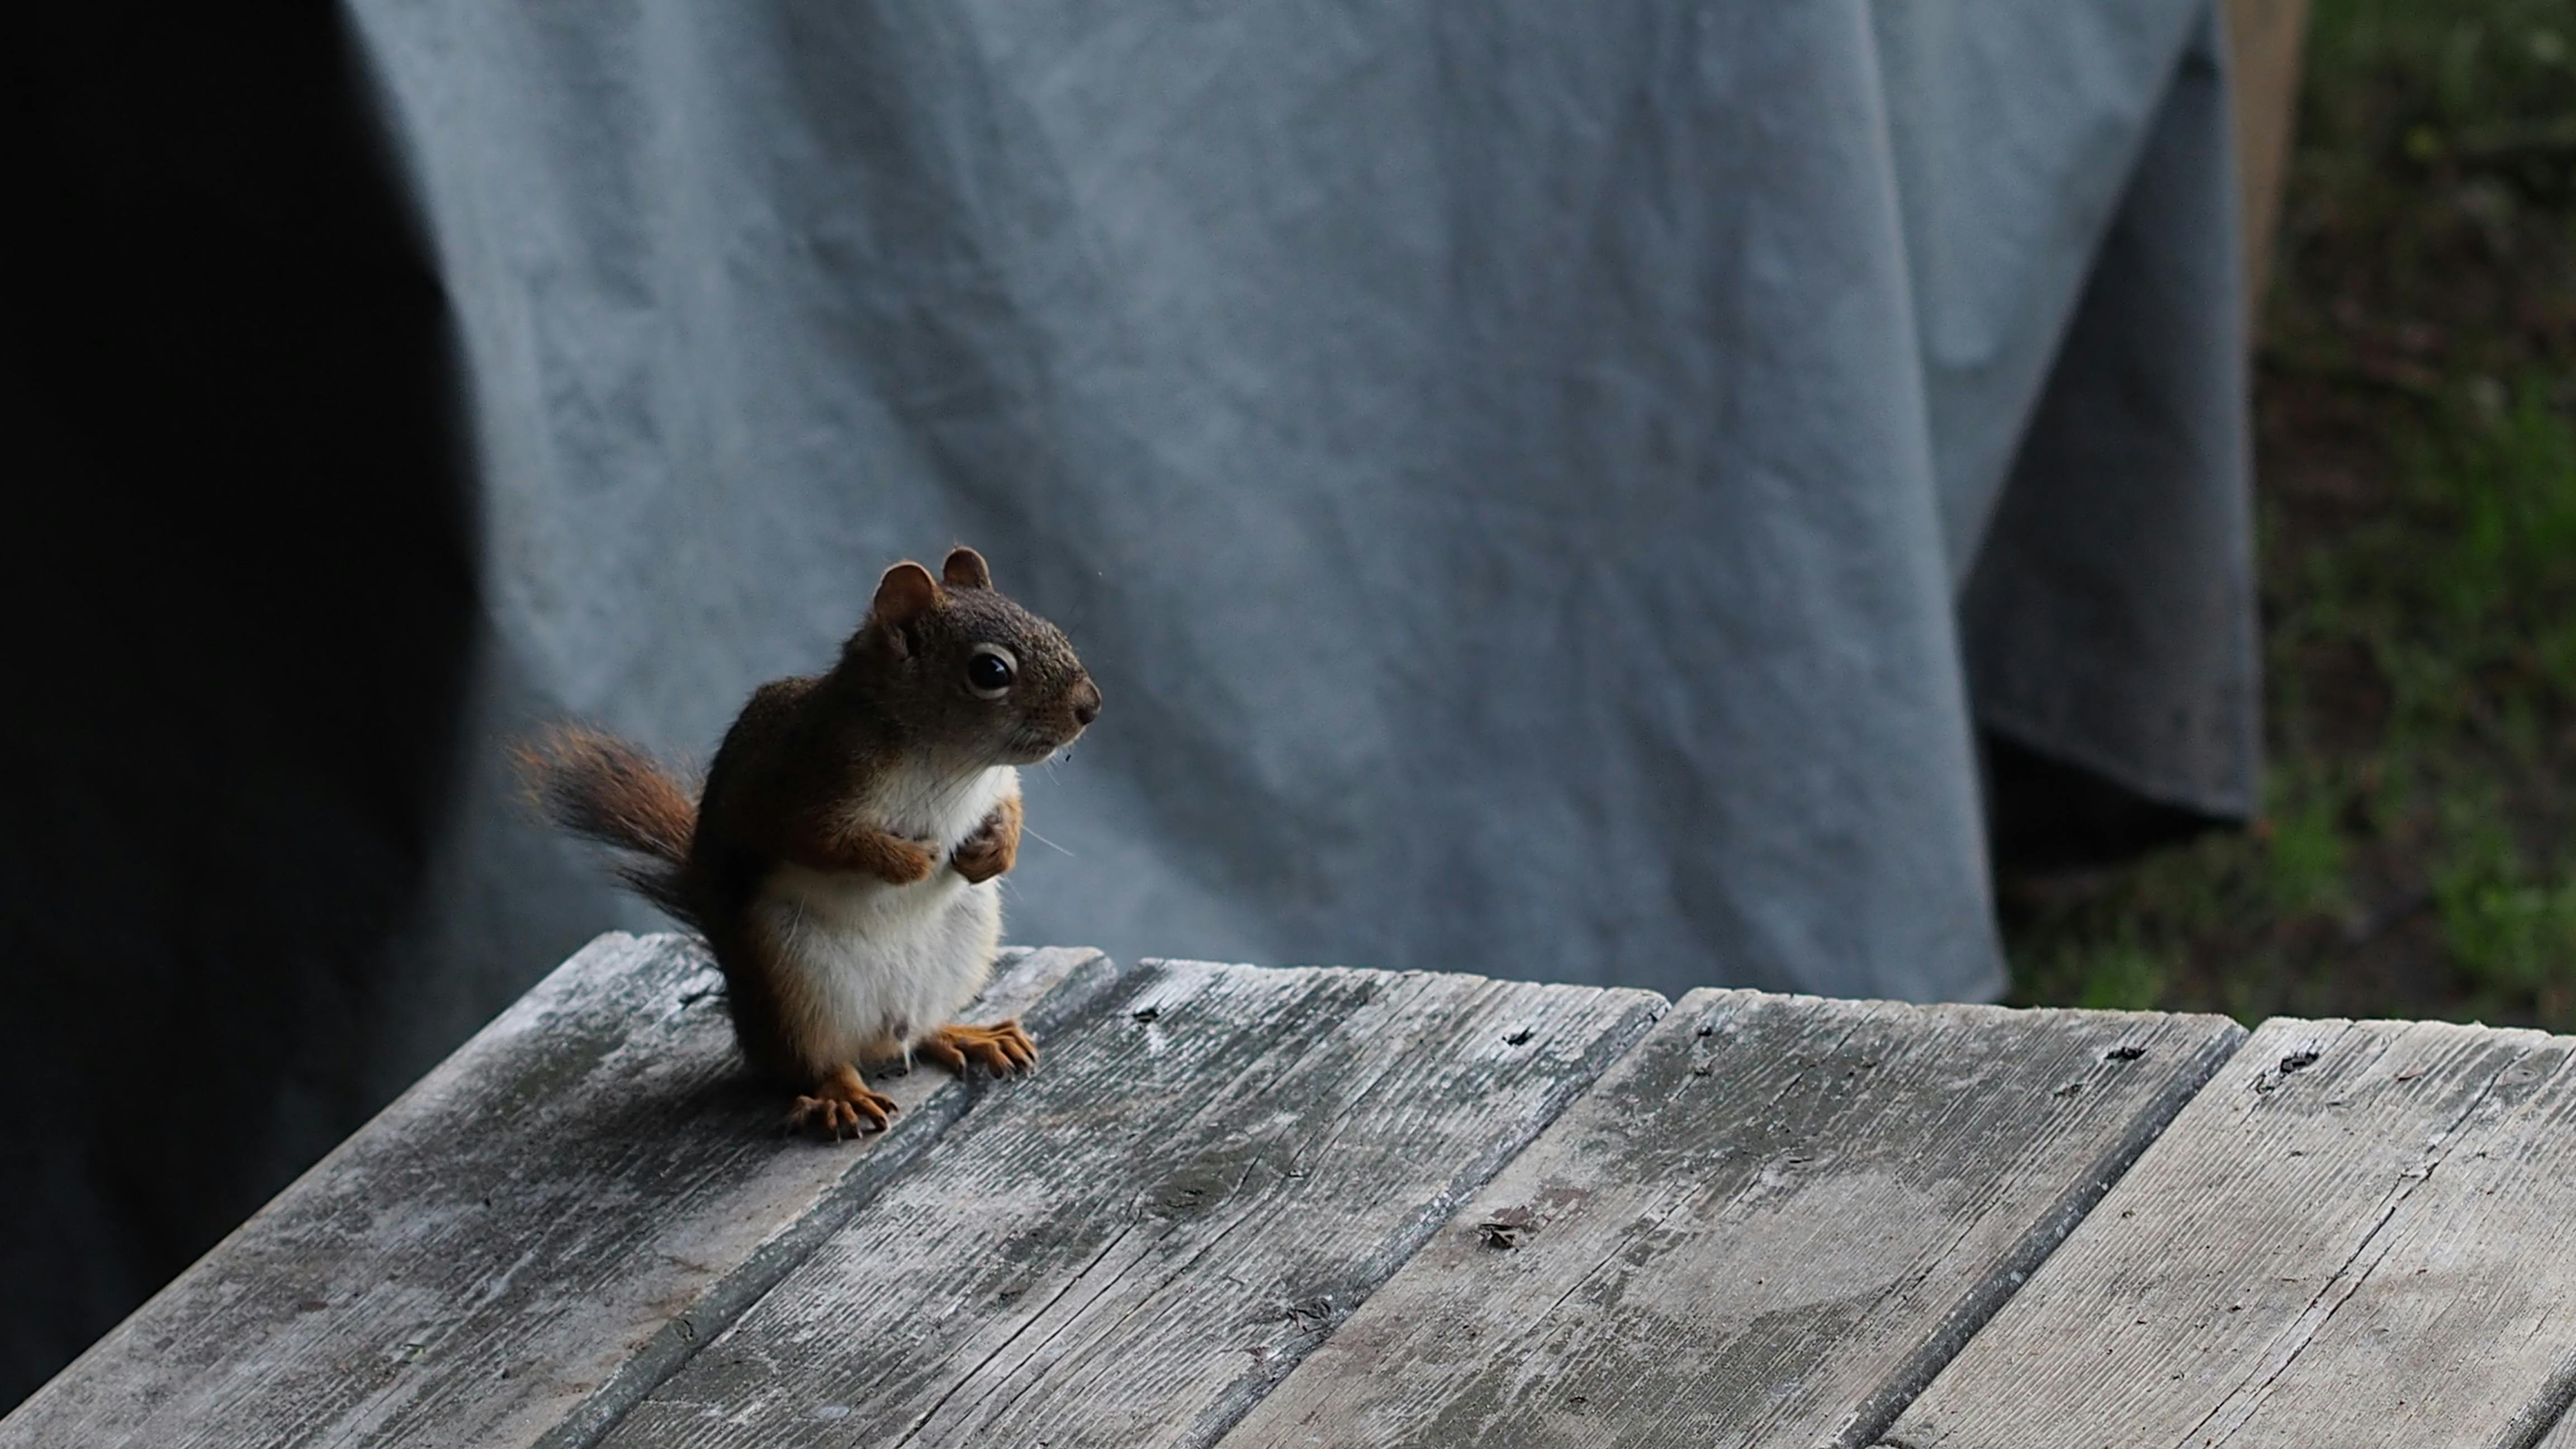 Squirrel On Top Of Wooden Table